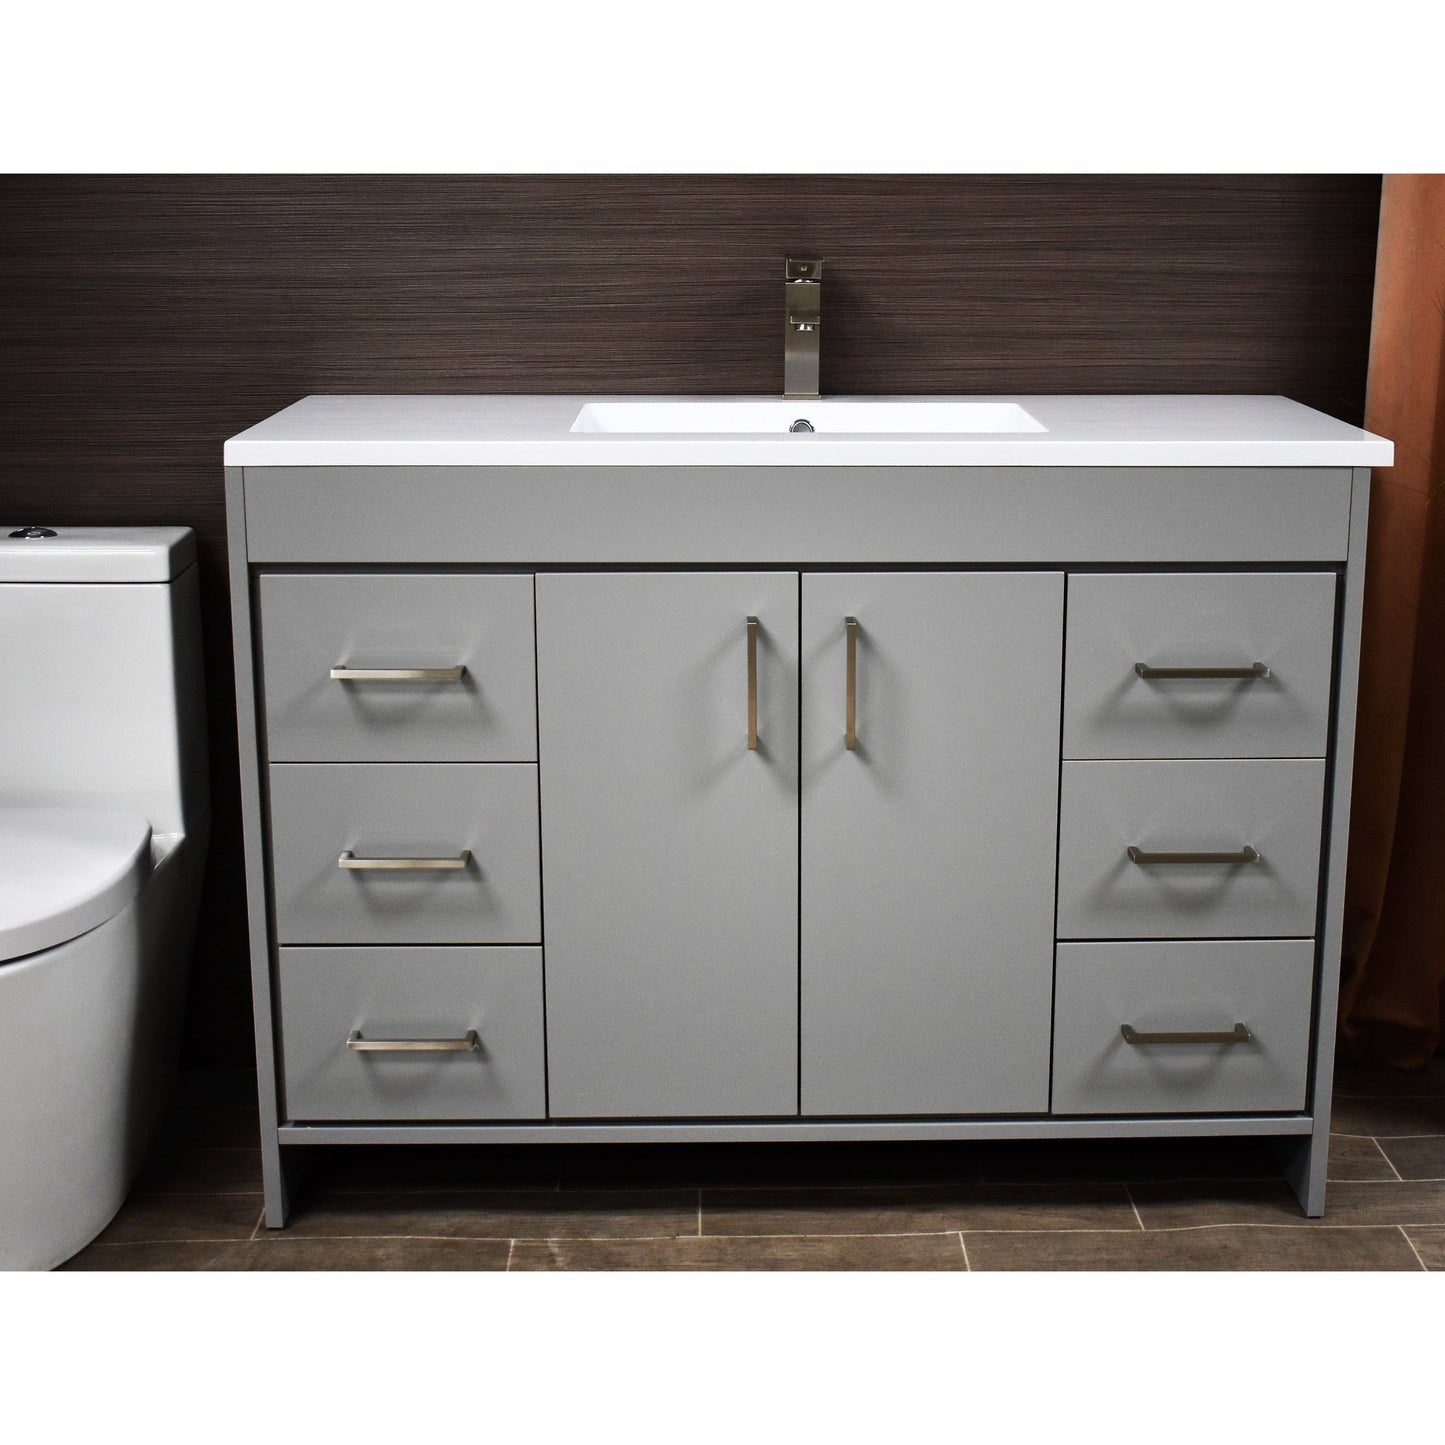 Volpa USA Rio 48" Gray Freestanding Modern Bathroom Vanity With Integrated Acrylic Top and Brushed Nickel Handles